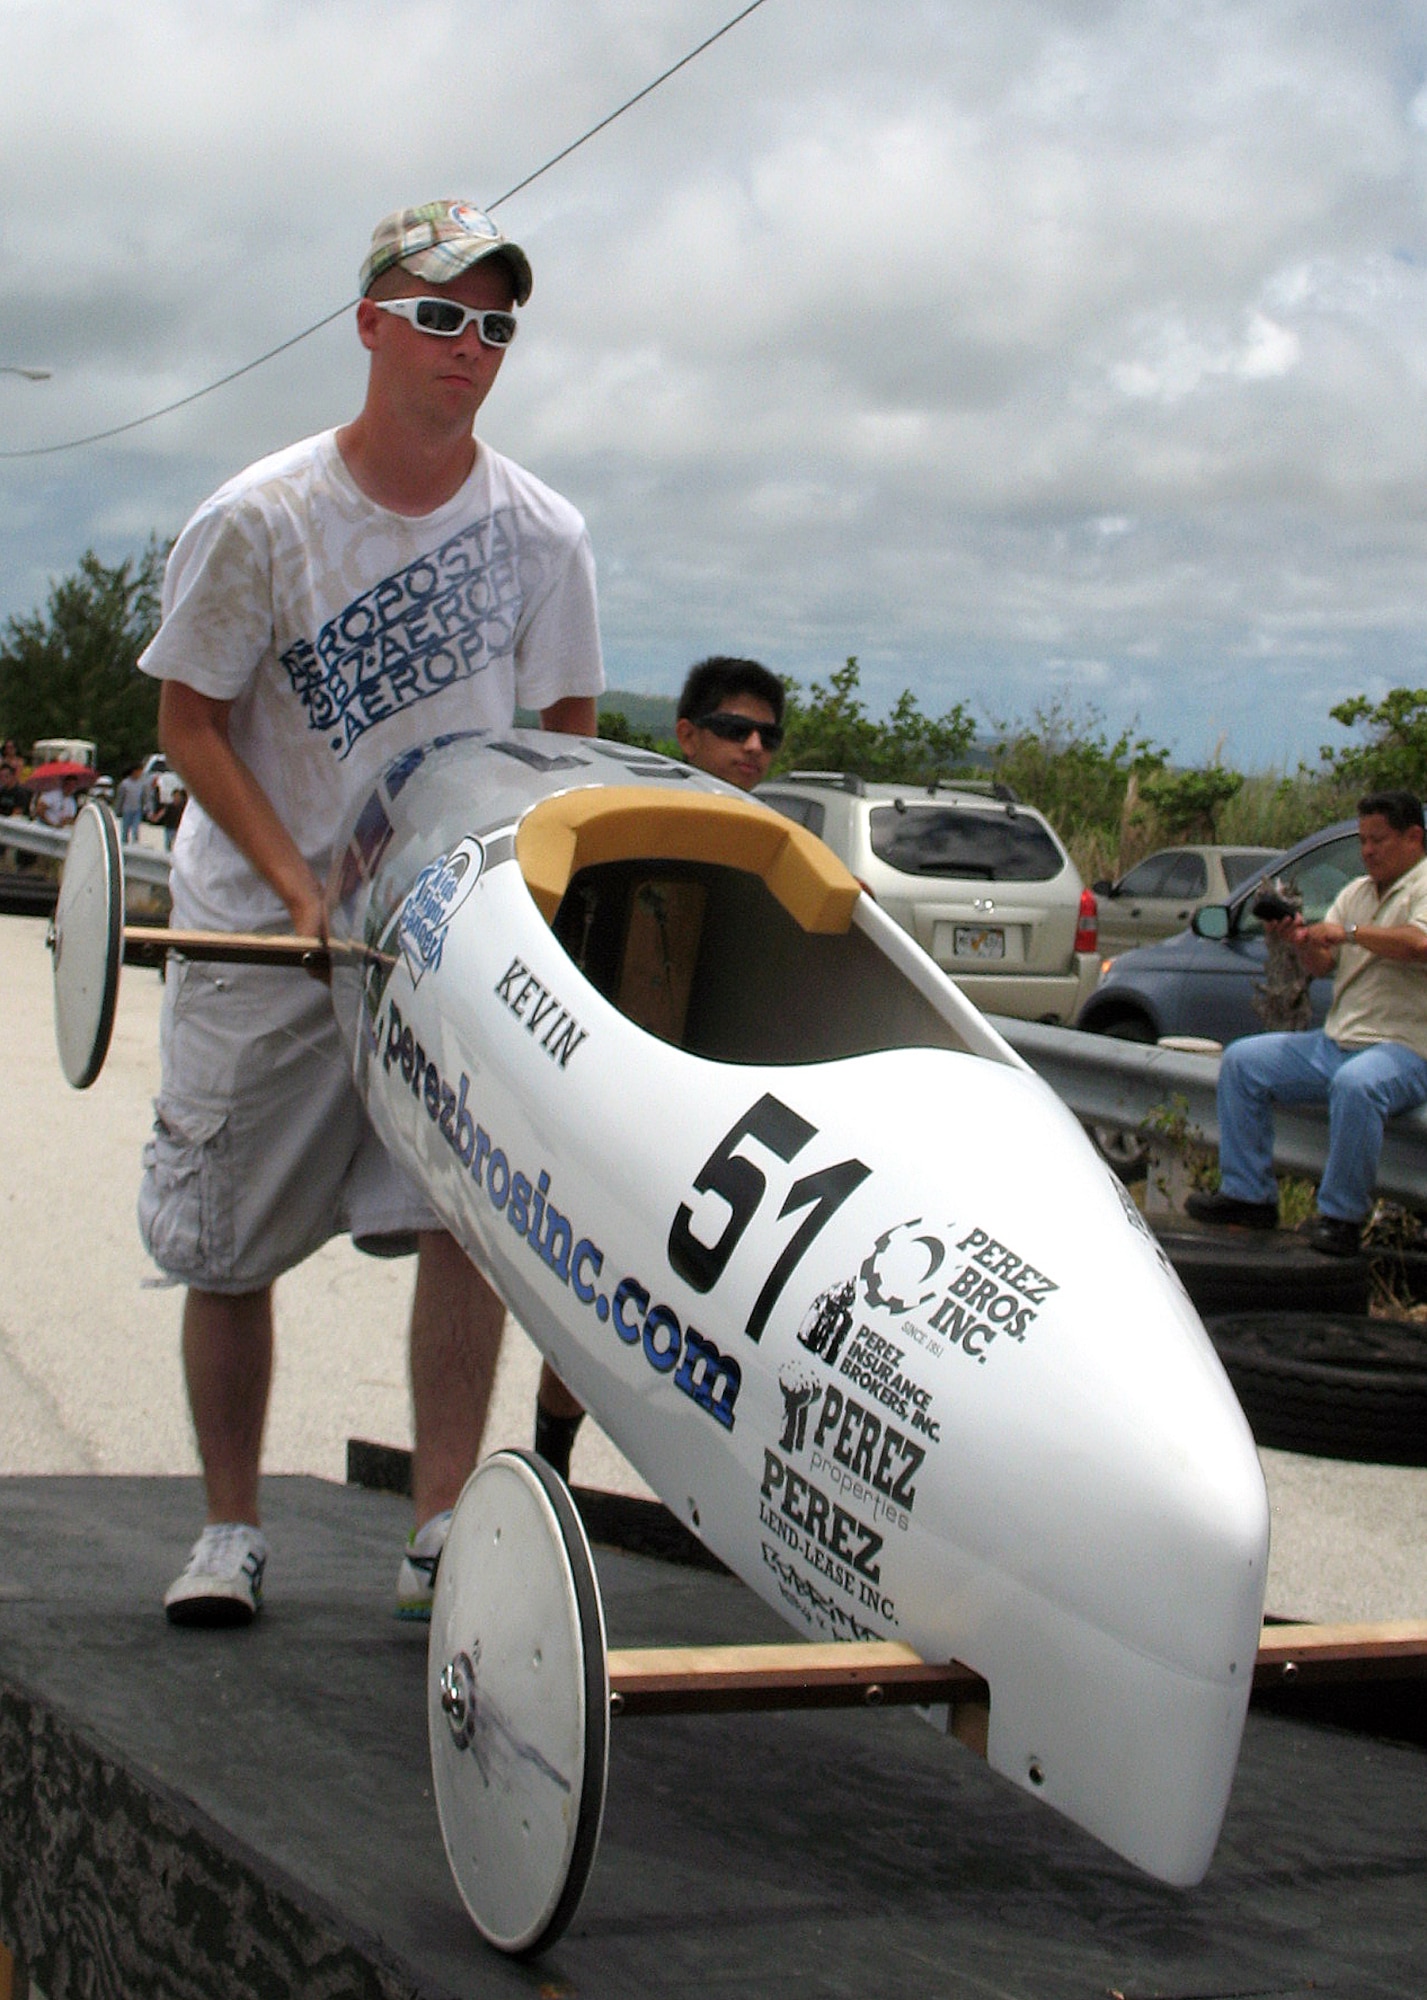 ANDERSEN AIR FORCE BASE, Guam -- Airman 1st Class Daniel Mckissack, 36th Maintenance Squadron aerospace ground equipment technician, help load a soap box car onto release ramp at the Yigo drag strip May 9. Approximately 20 Team Andersen volunteers were at the soap box derby. (U.S. Air Force photo by Airman Carissa Wolff)
